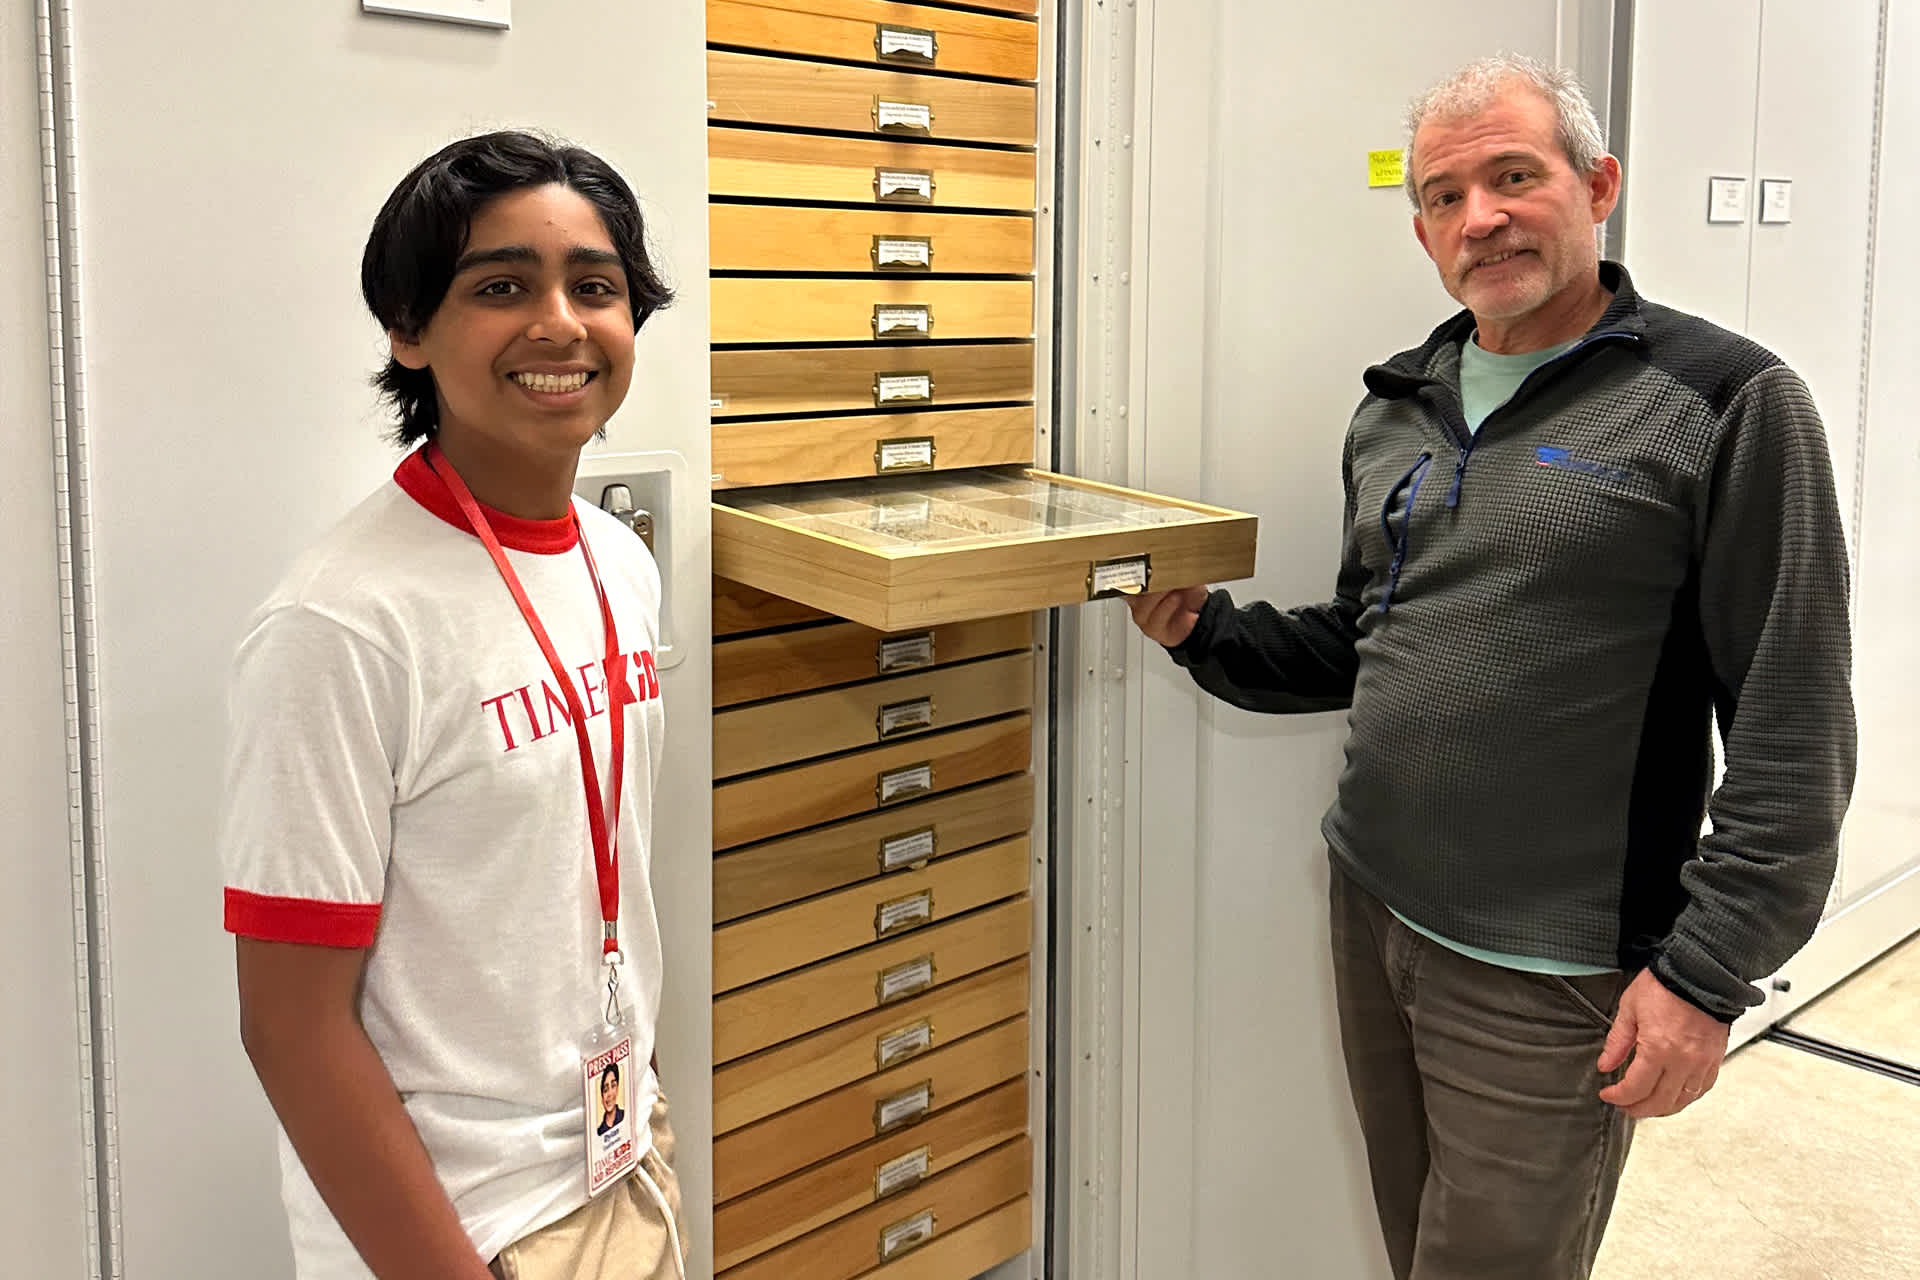 A boy and a man standing near a cabinet of drawers, smiling.